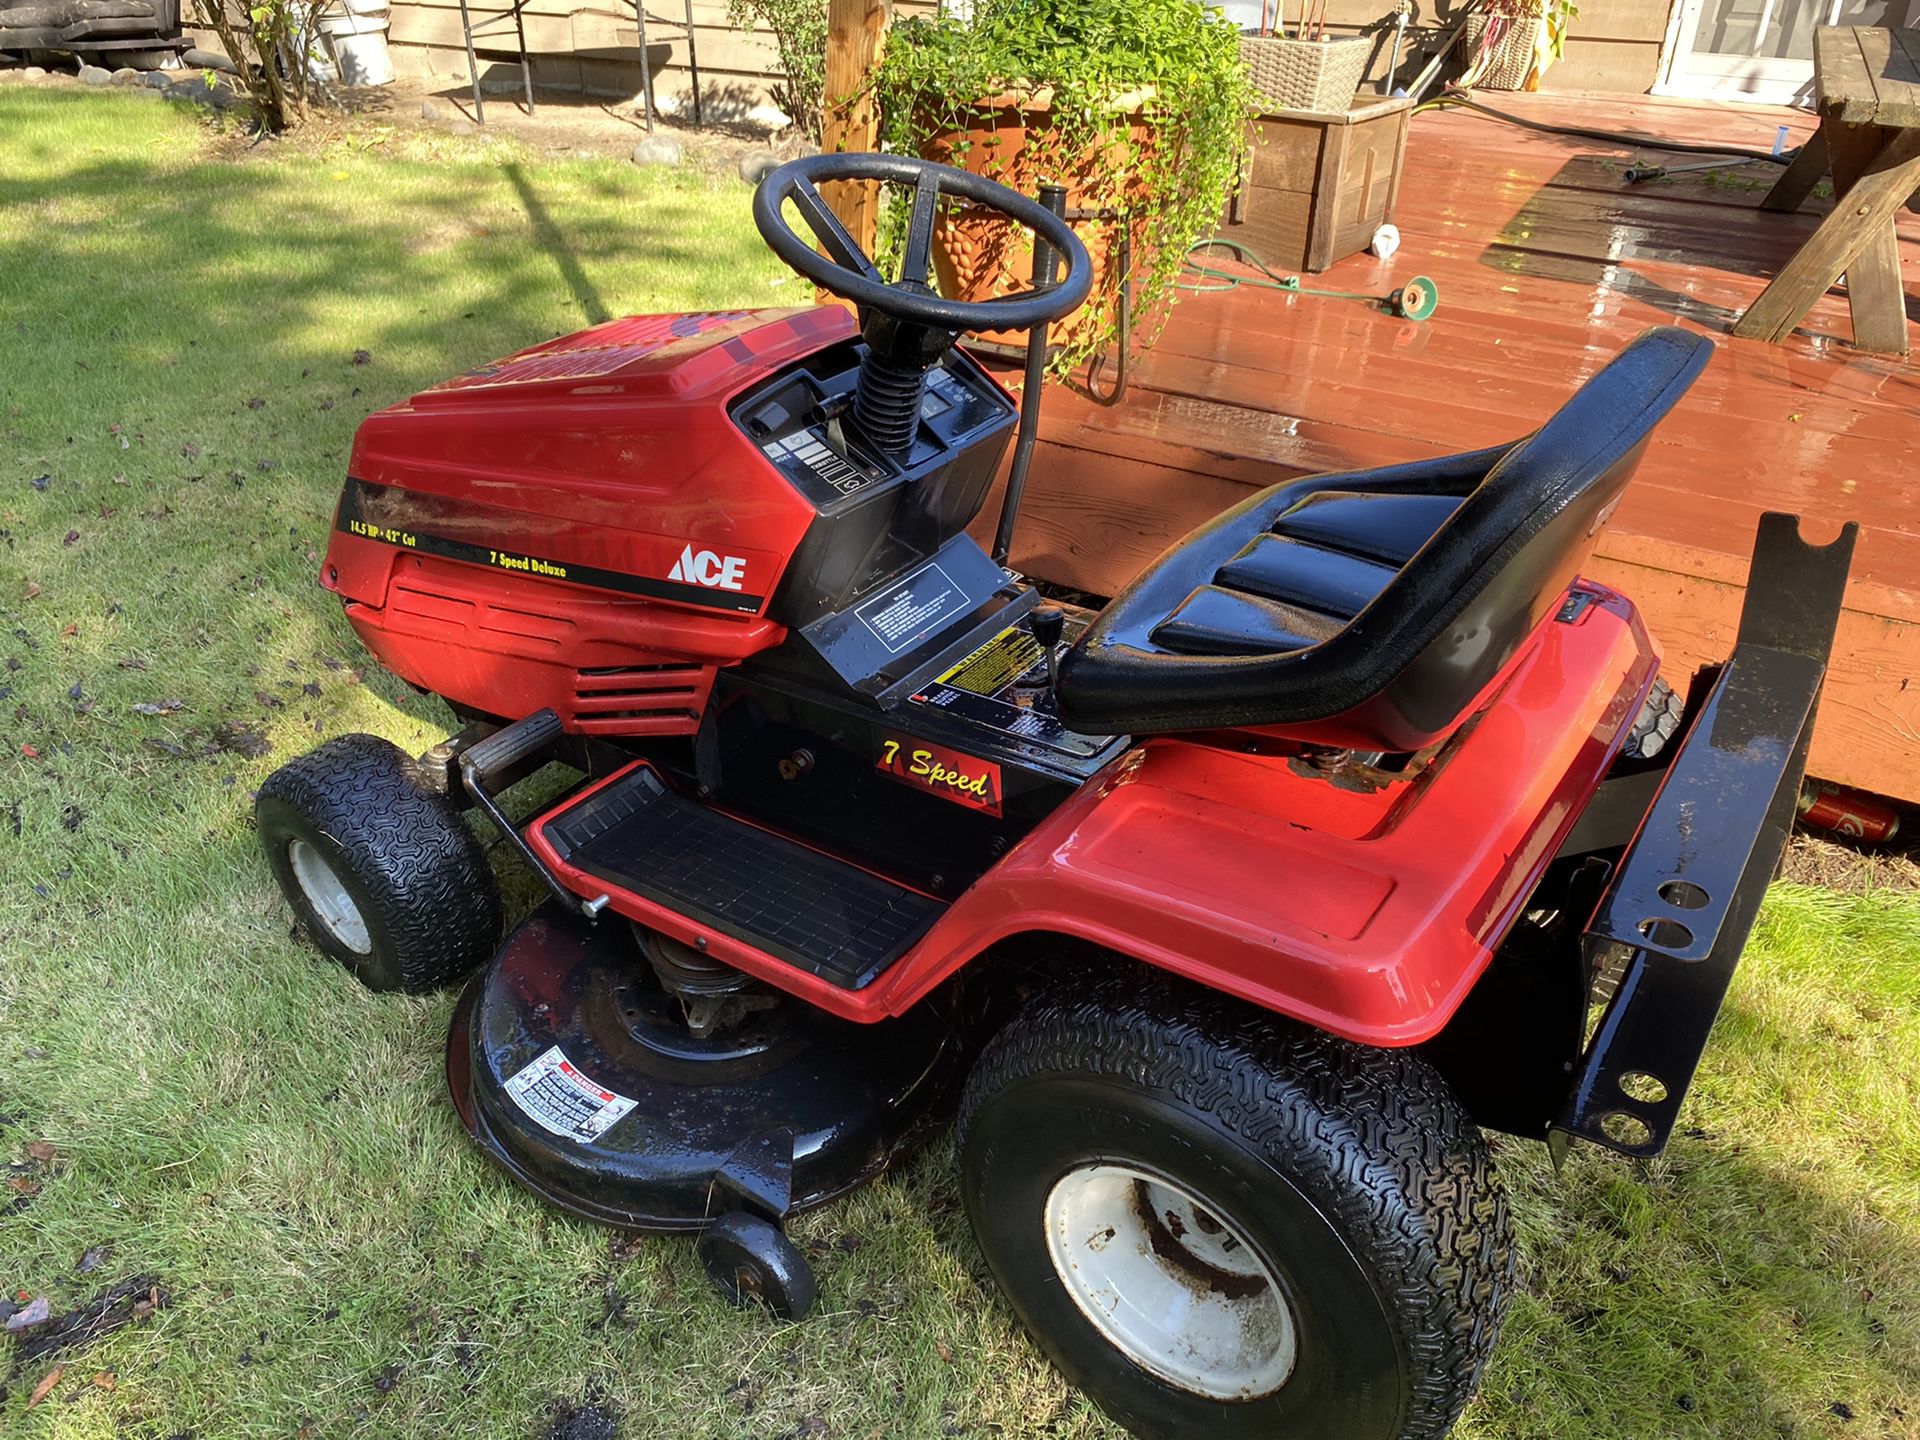 Ace riding lawn mower